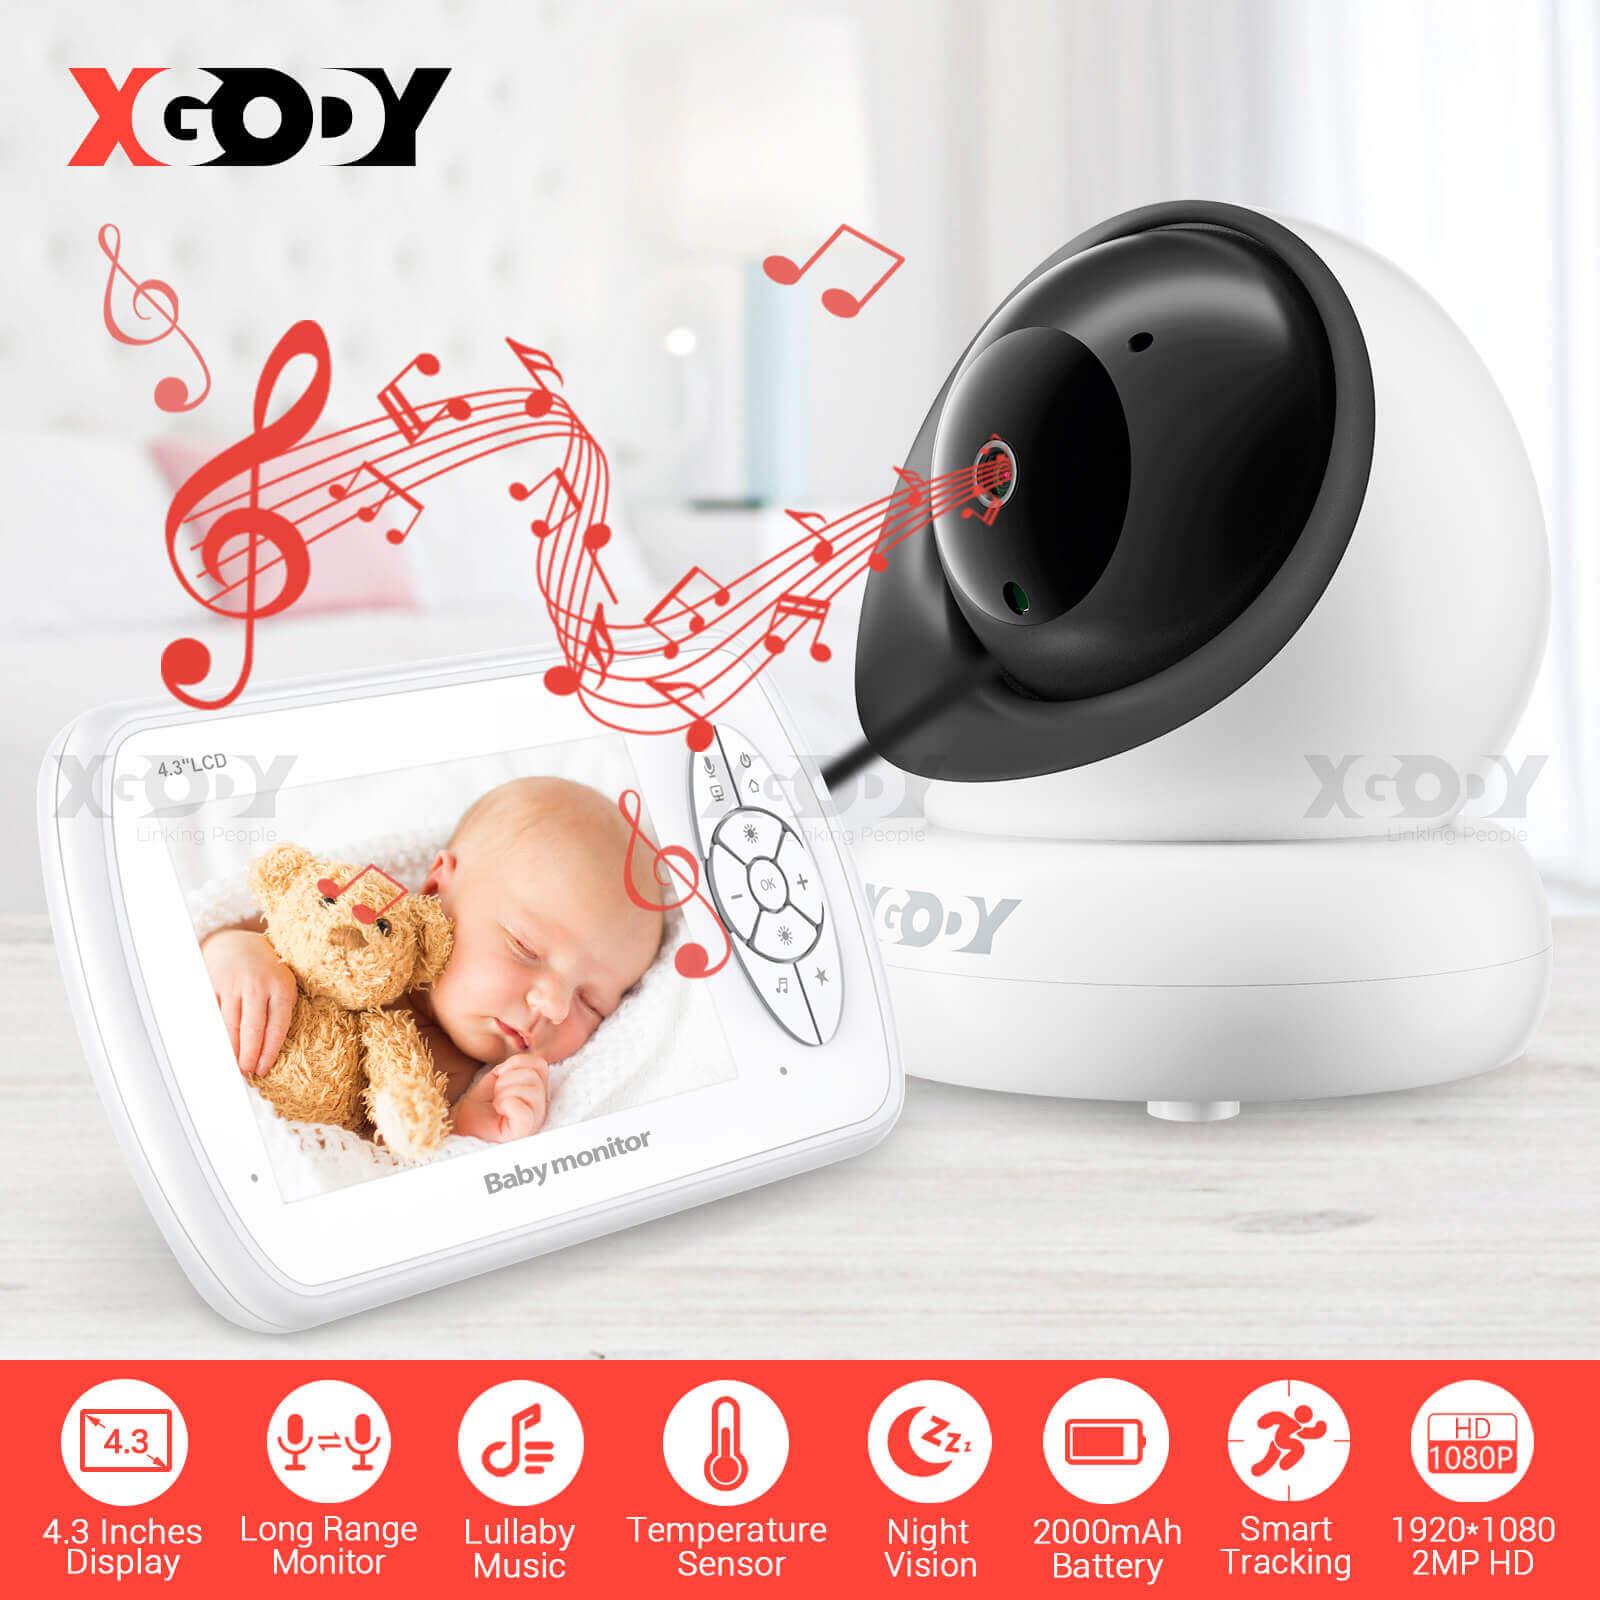 Cost-effective and Most worthwhile XGODY Smart 1080P Baby Monitor BM638 with 4.3” LCD Screen, Lullabies, Two Way Audio - XGODY 